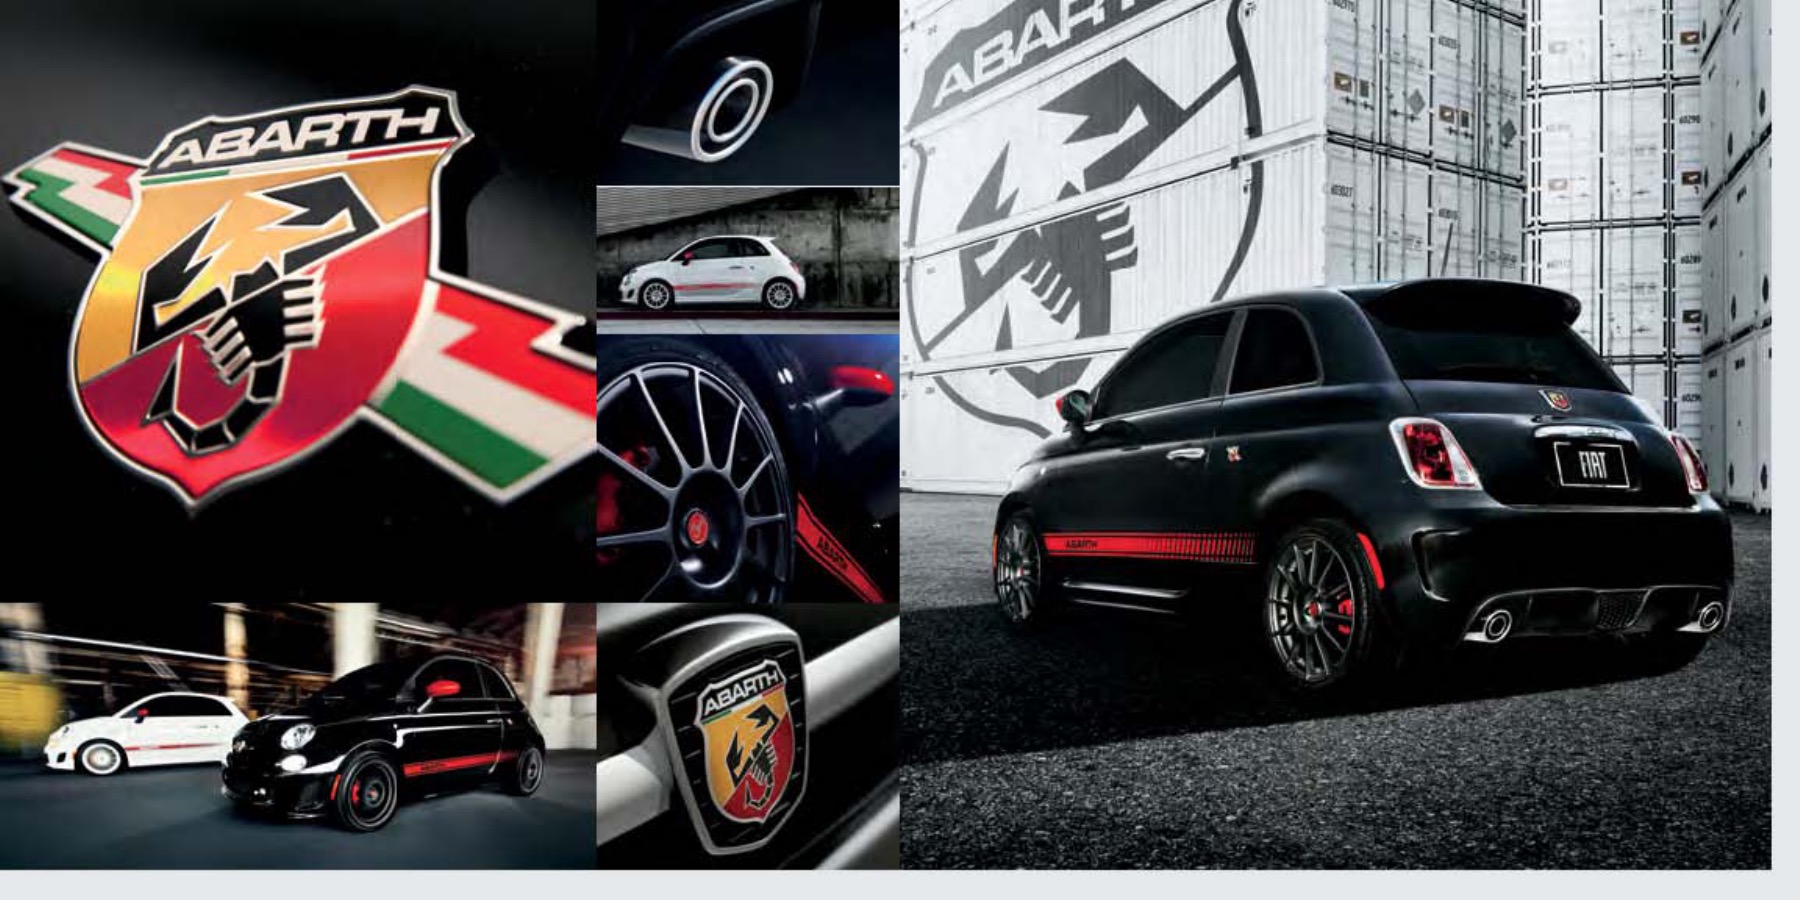 2012 Fiat 500 Abarth Brochure Page 4